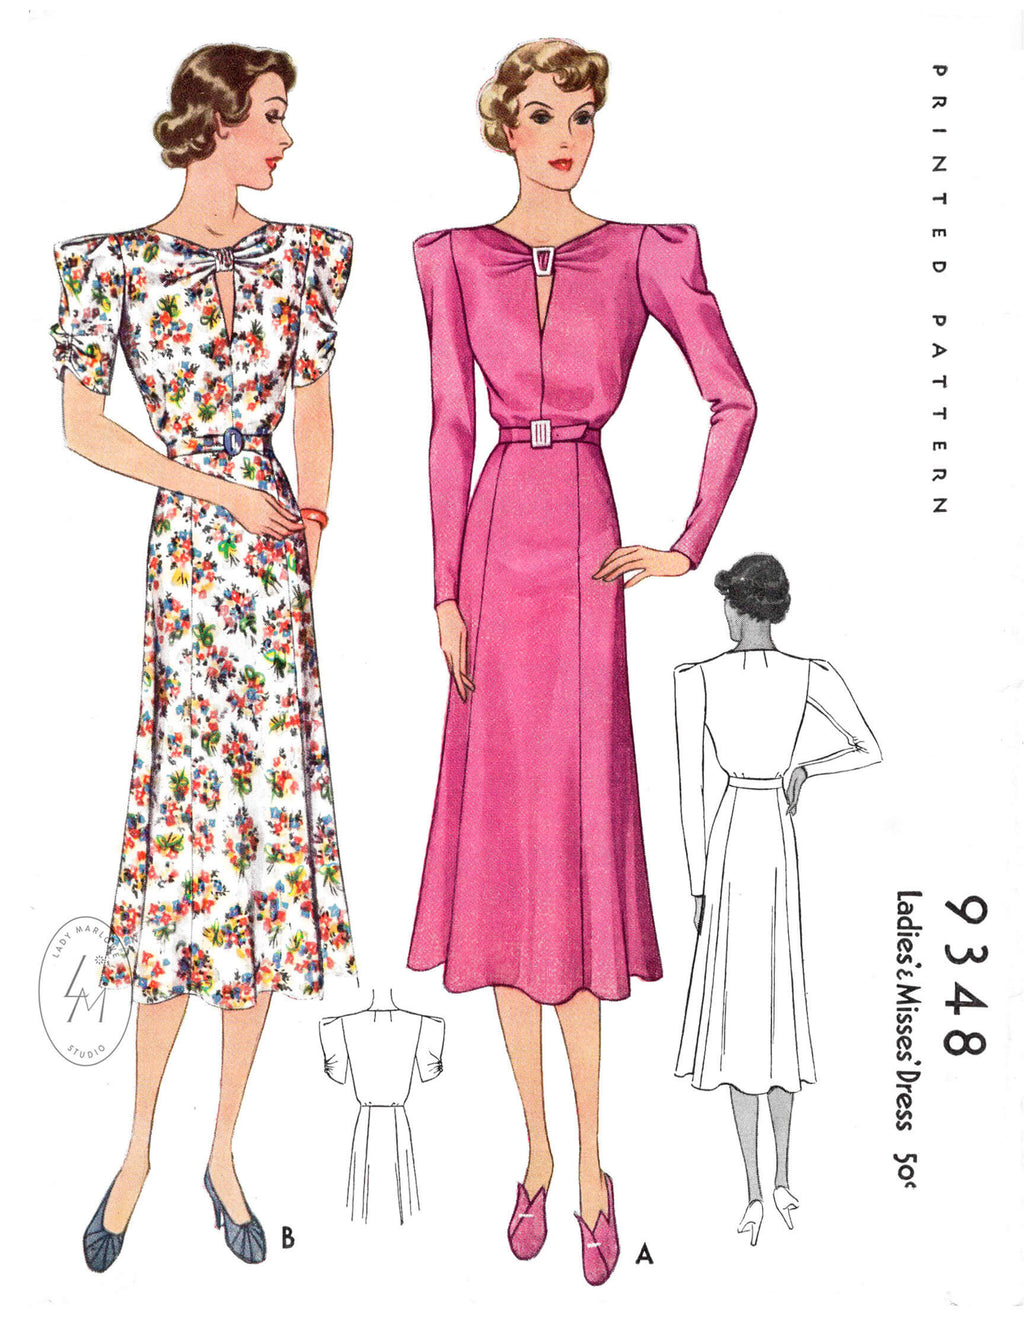 1930s 1937 vintage day dress McCall 9348 statement sleeves flounce skirt ruching detail reproduction sewing pattern 